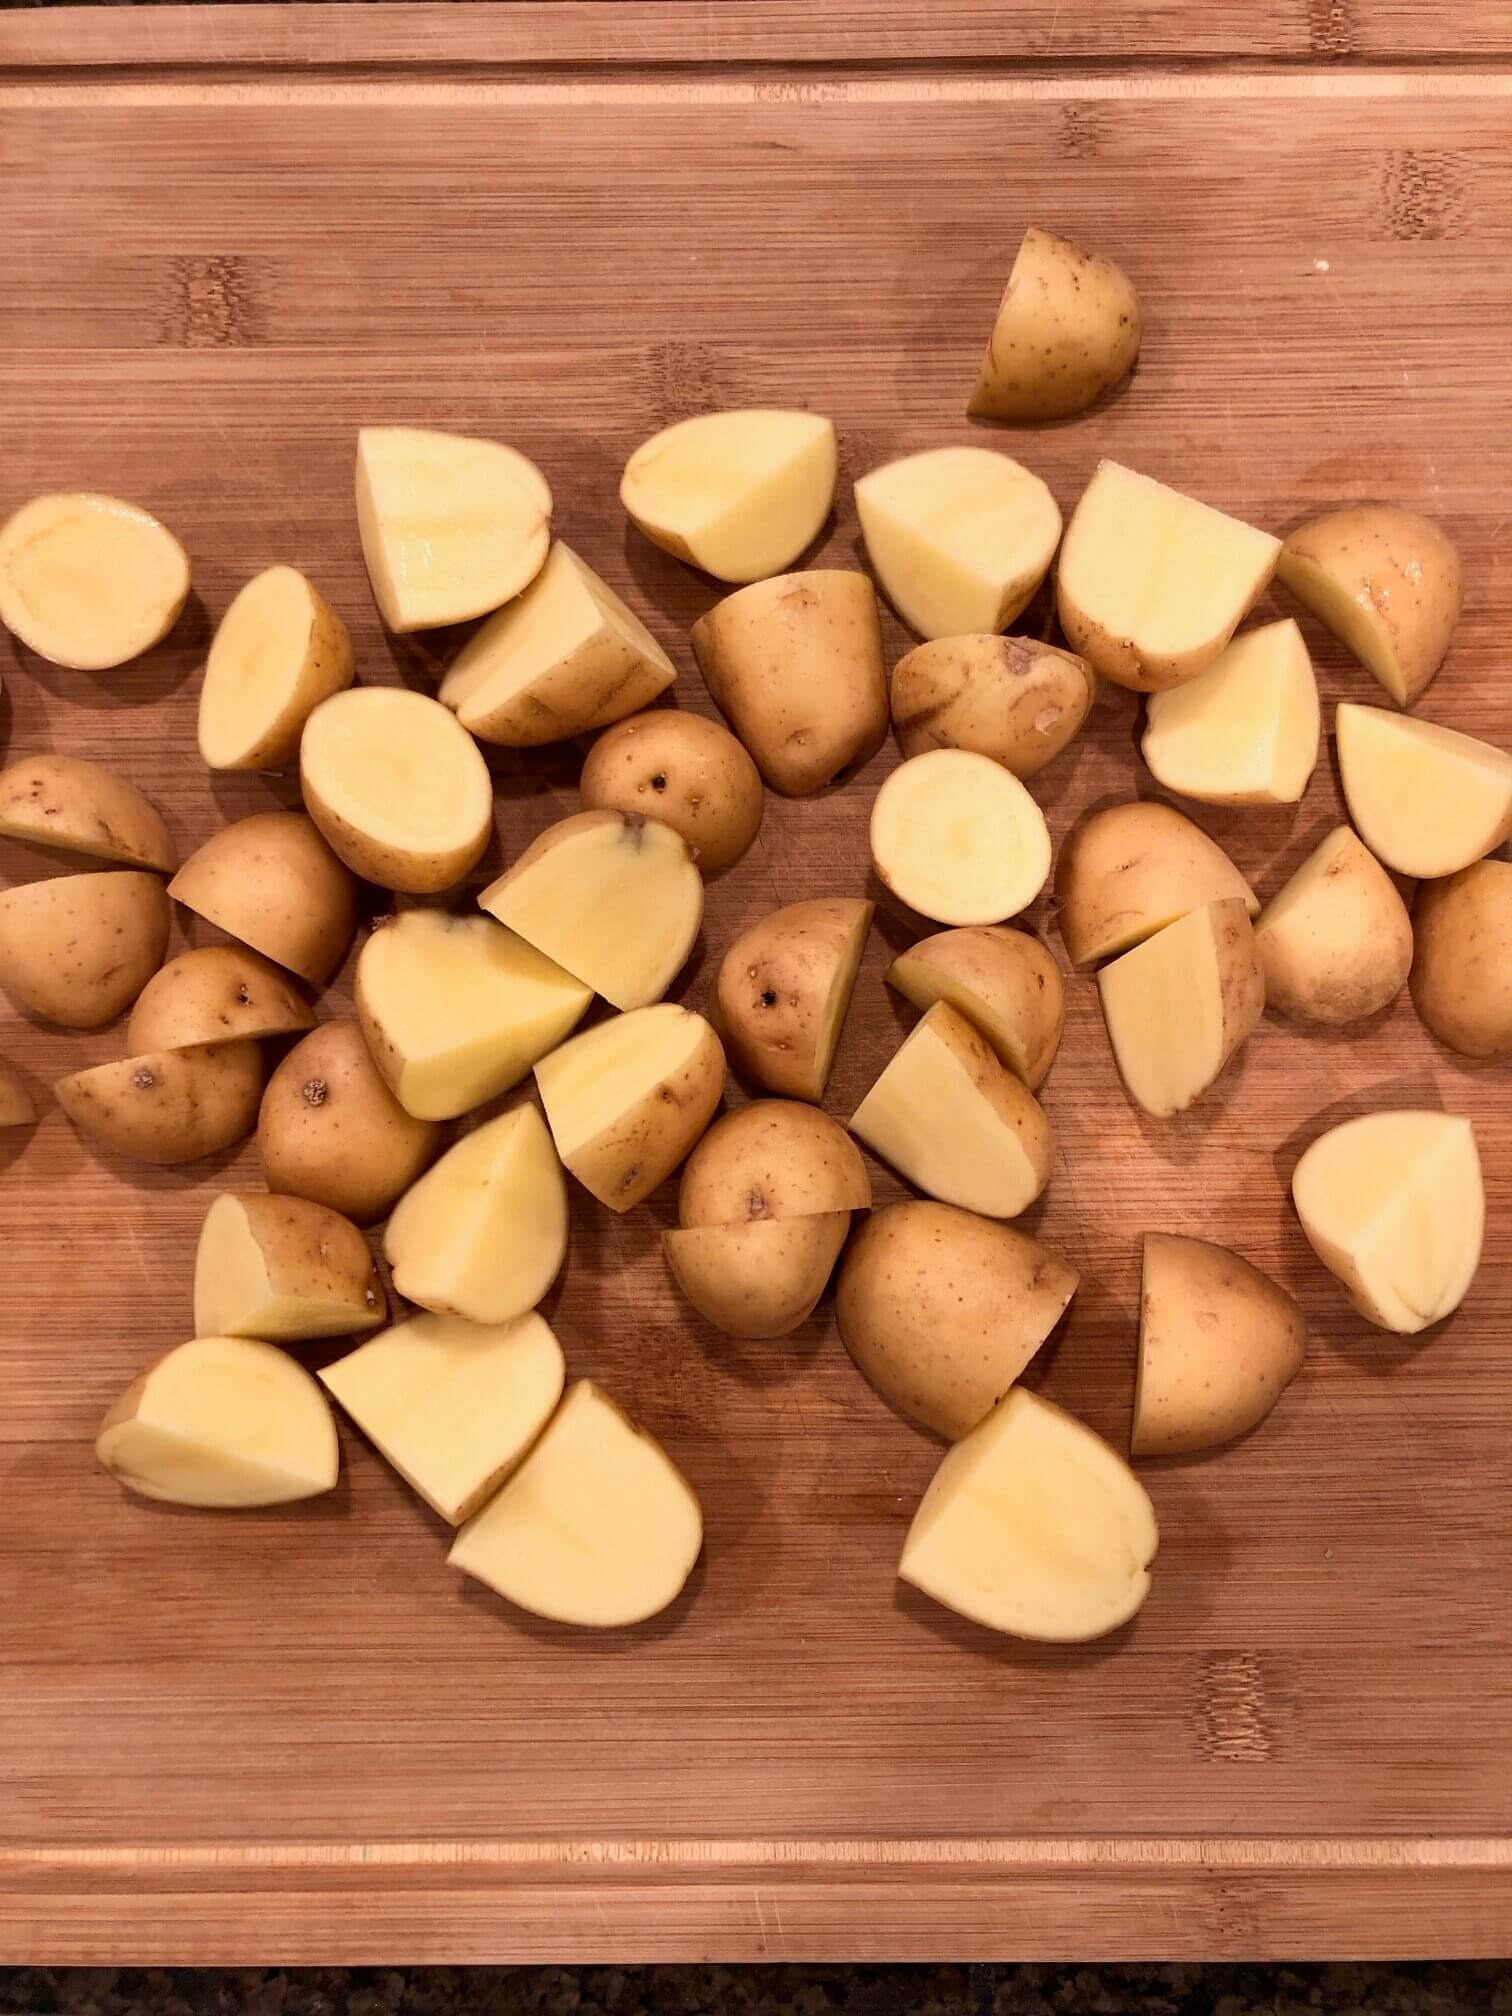 One pound of potatoes, cut into quarters